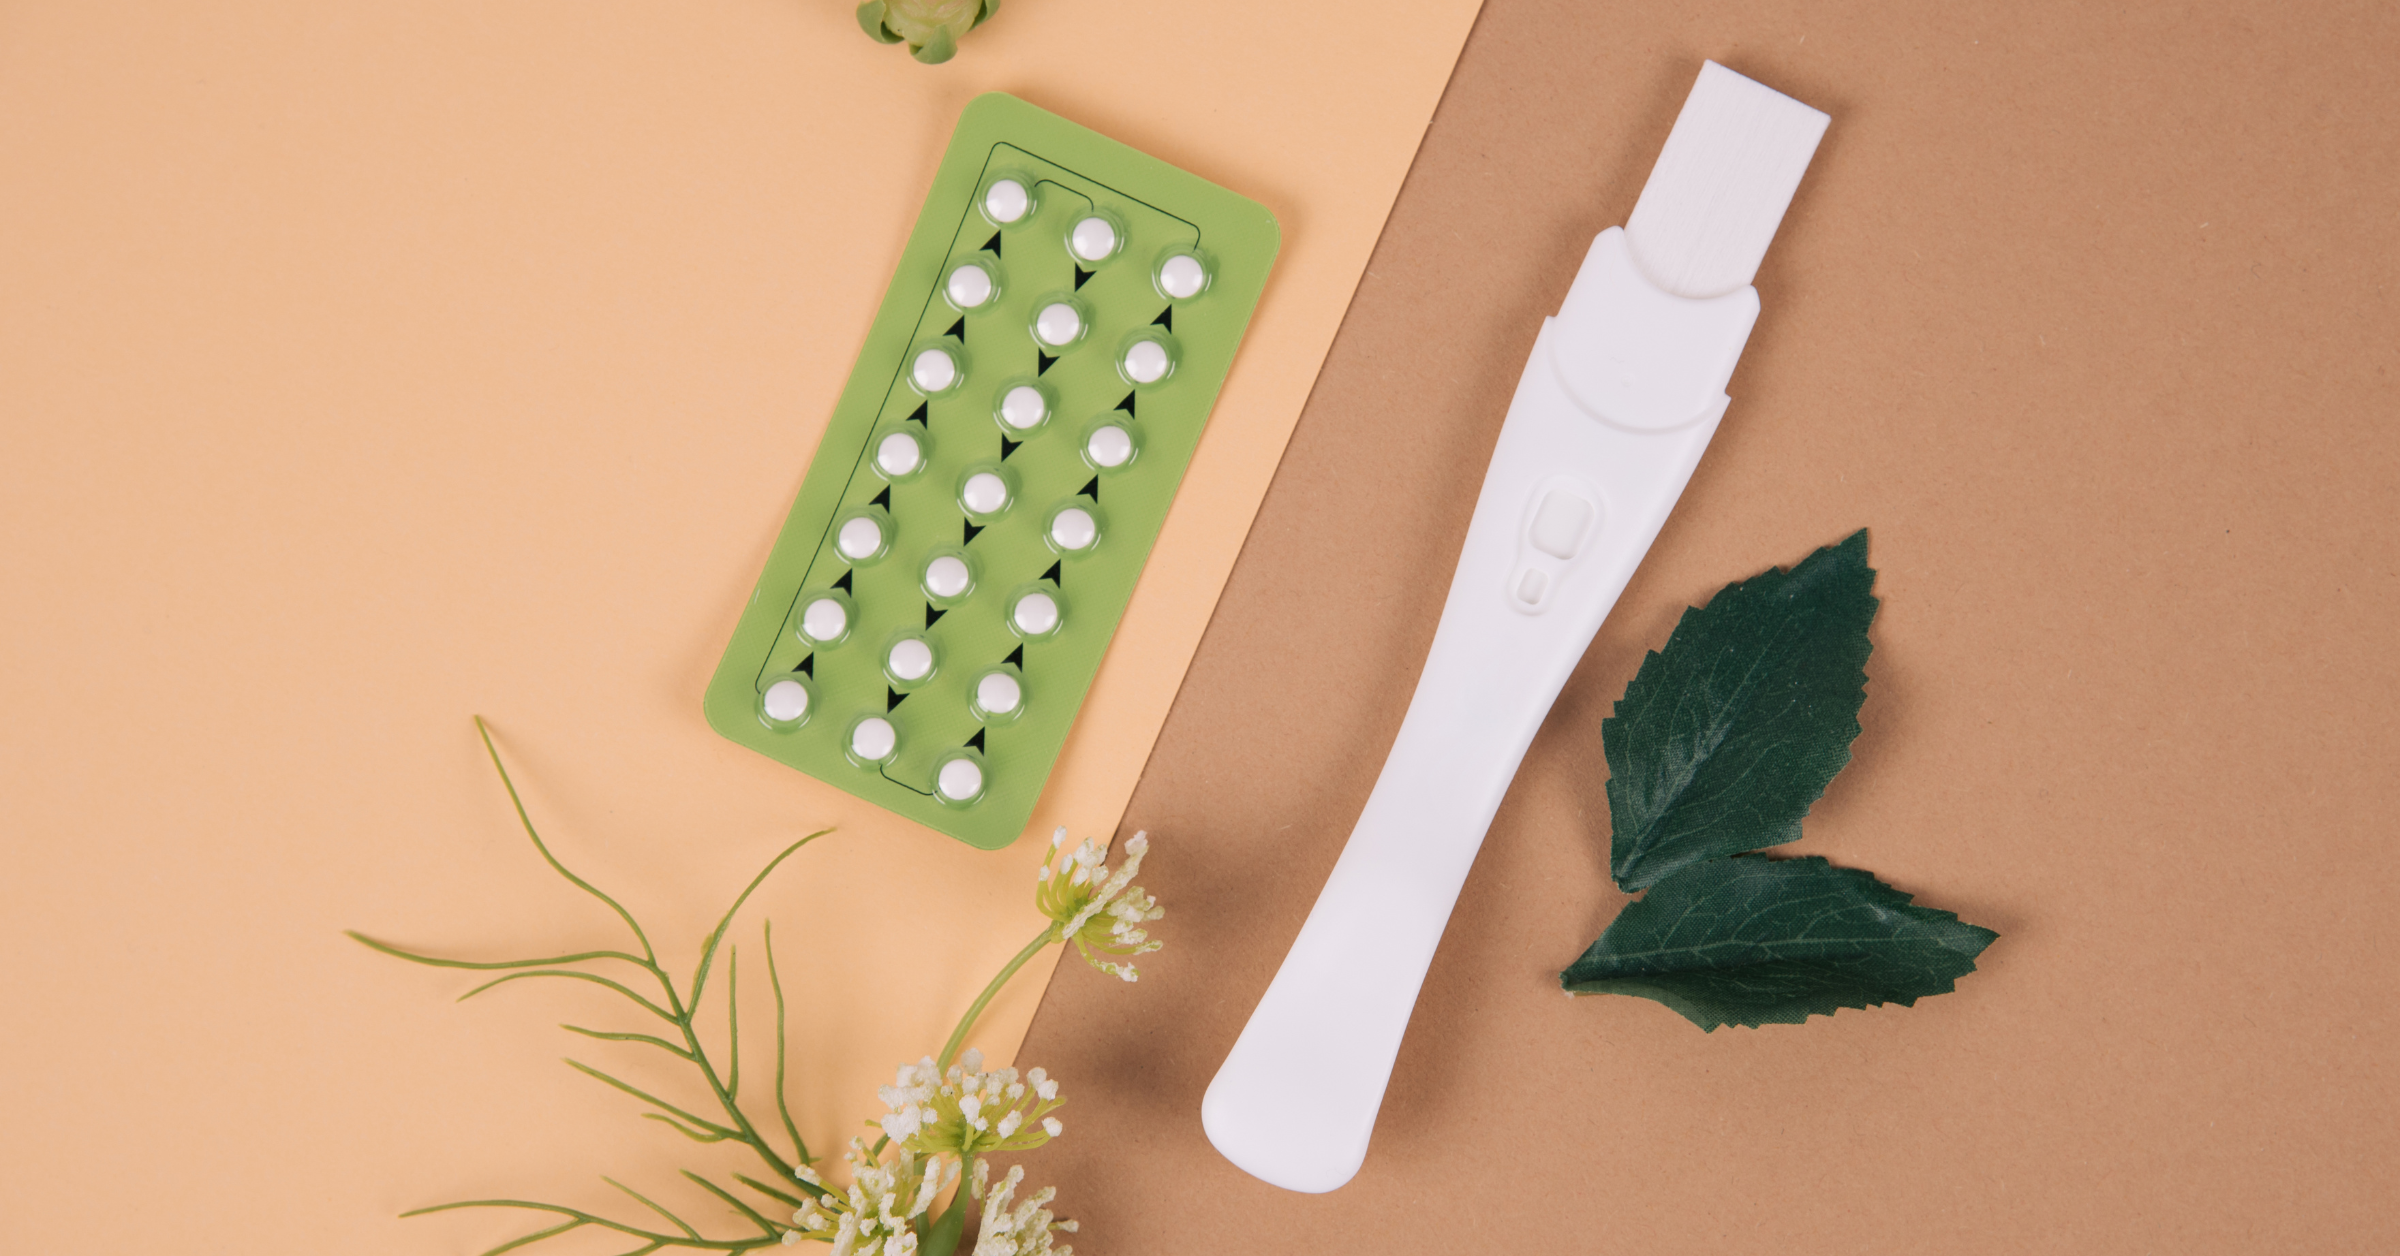 Explore the challenges of hormonal birth control and copper IUDs, and discover the best natural solutions for effective and balanced contraception